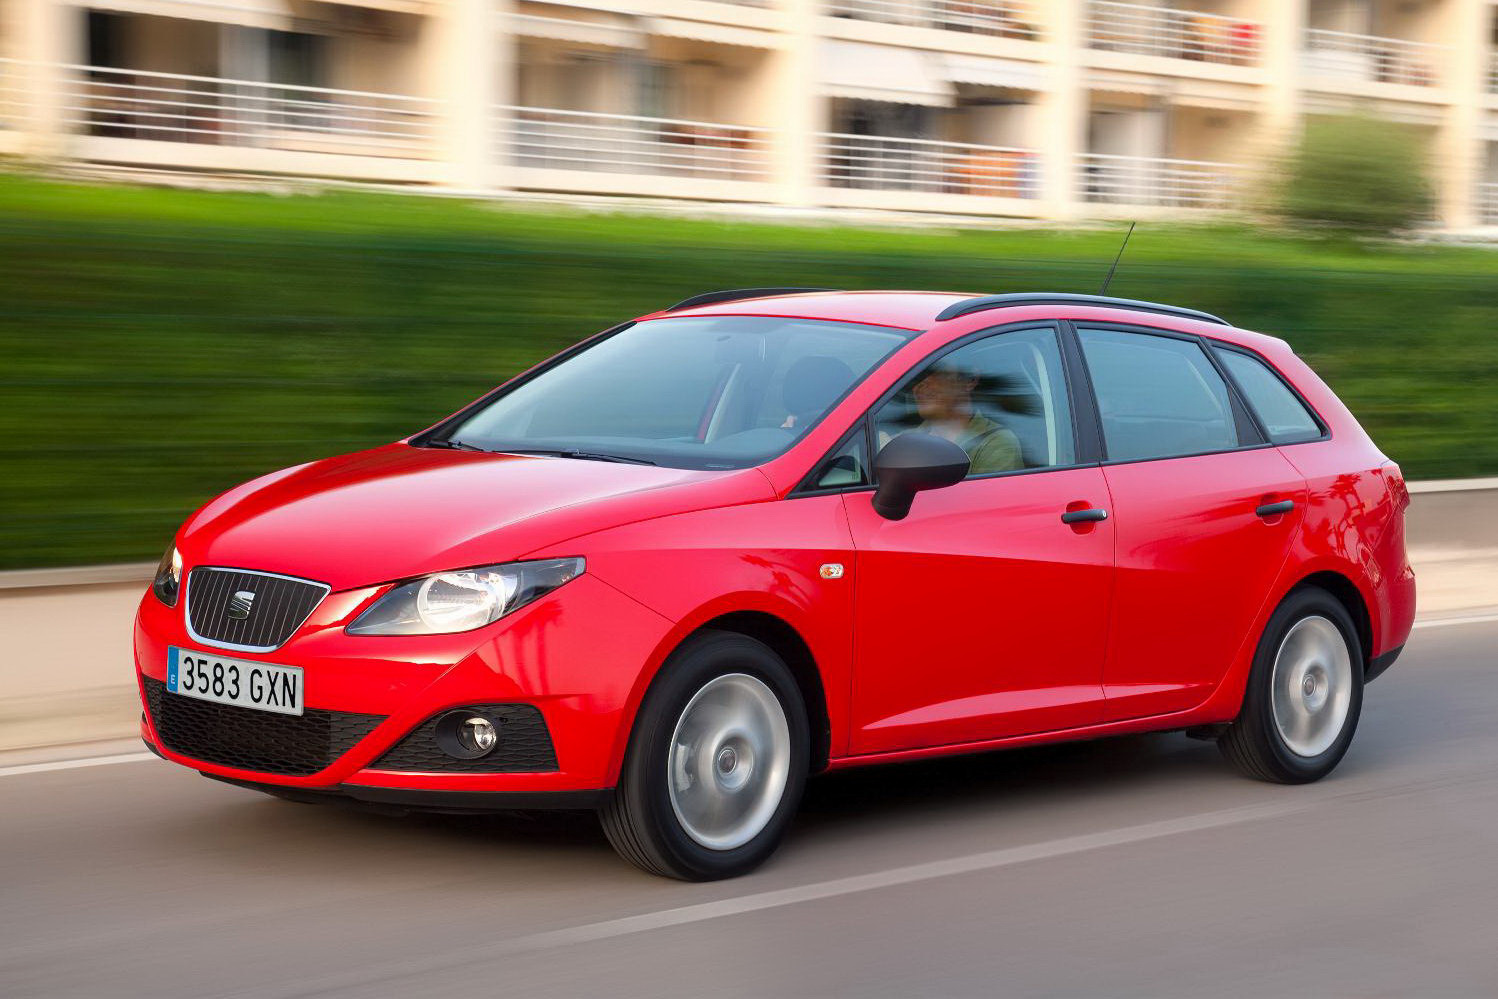 Orkaan Bewolkt Aap New Seat Ibiza ST Priced from £12,070 in Britain | Carscoops